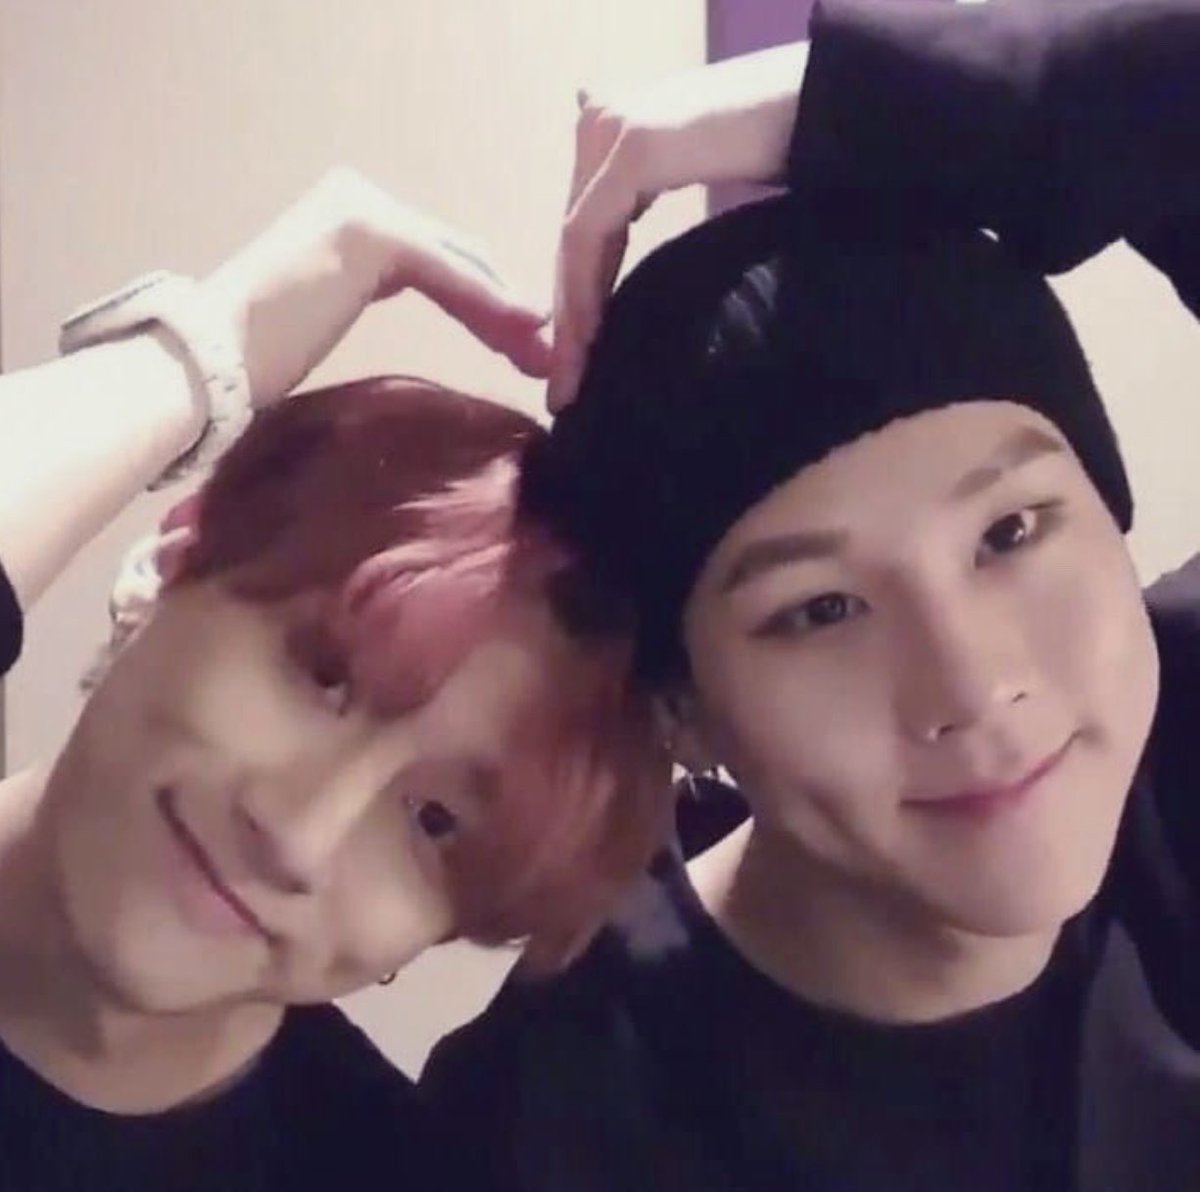 jookyun- maknae line rap gods- so clingy it makes my heart hurt - changkyun is so thankful that jooheon opened his heart to him when he first joined no mercy- ‘i received a cal from i.m recently I answered and he suddenly said ‘i just missed you hyung’